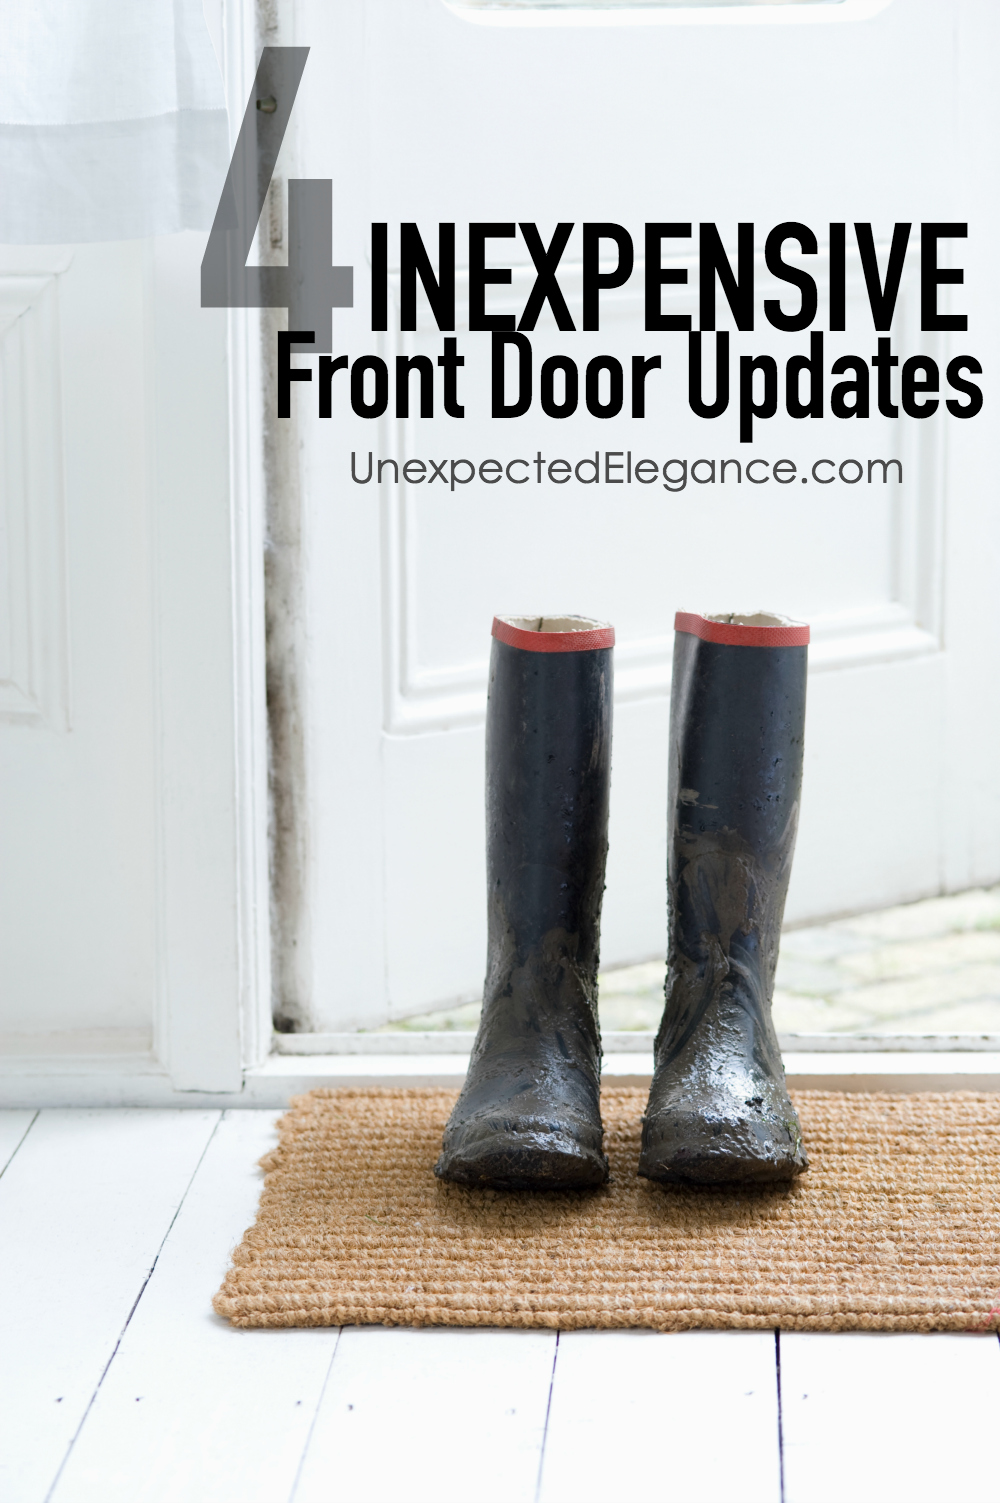 Your front door is the first thing people see when they walk up to your house, and is so important when it comes to curb appeal. Check out these inexpensive front door updates!